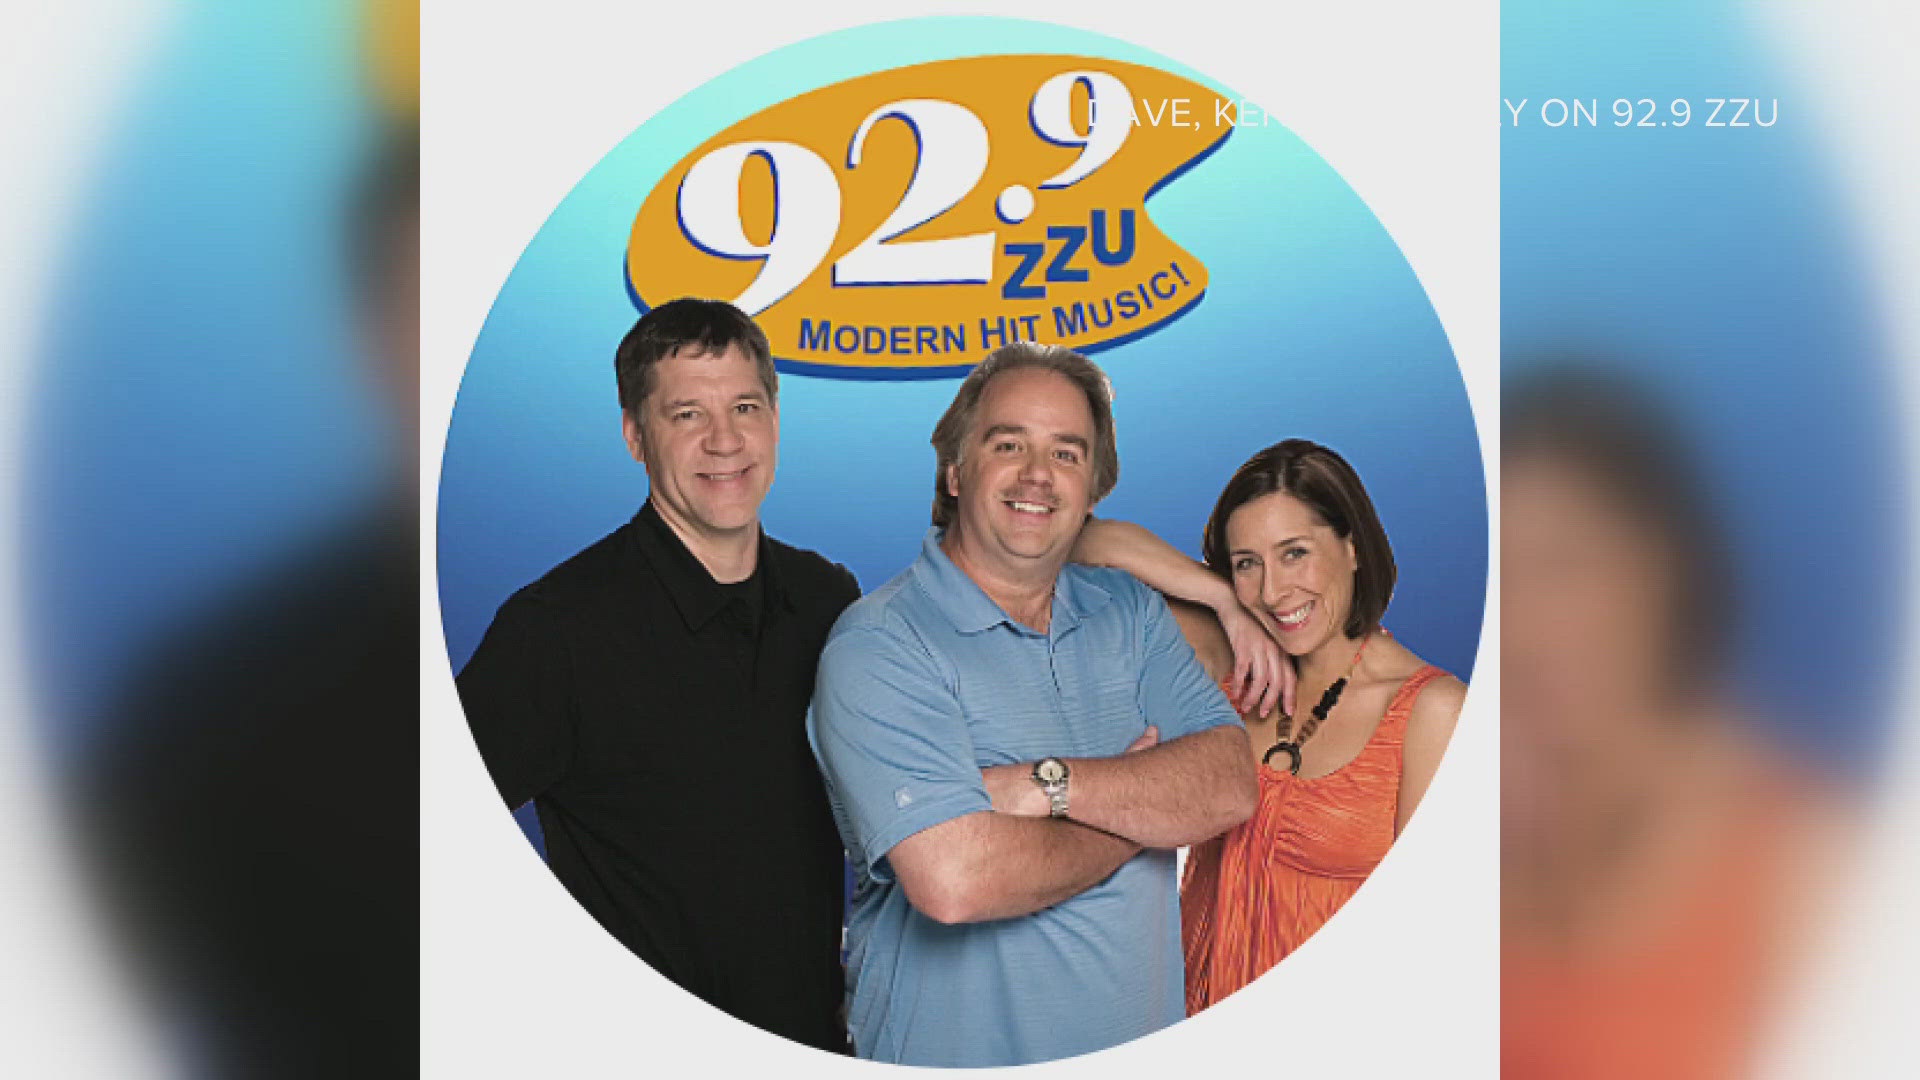 Morgan Murphy Media canceled the show, without time to allow the hosts to say goodbye to their listeners.